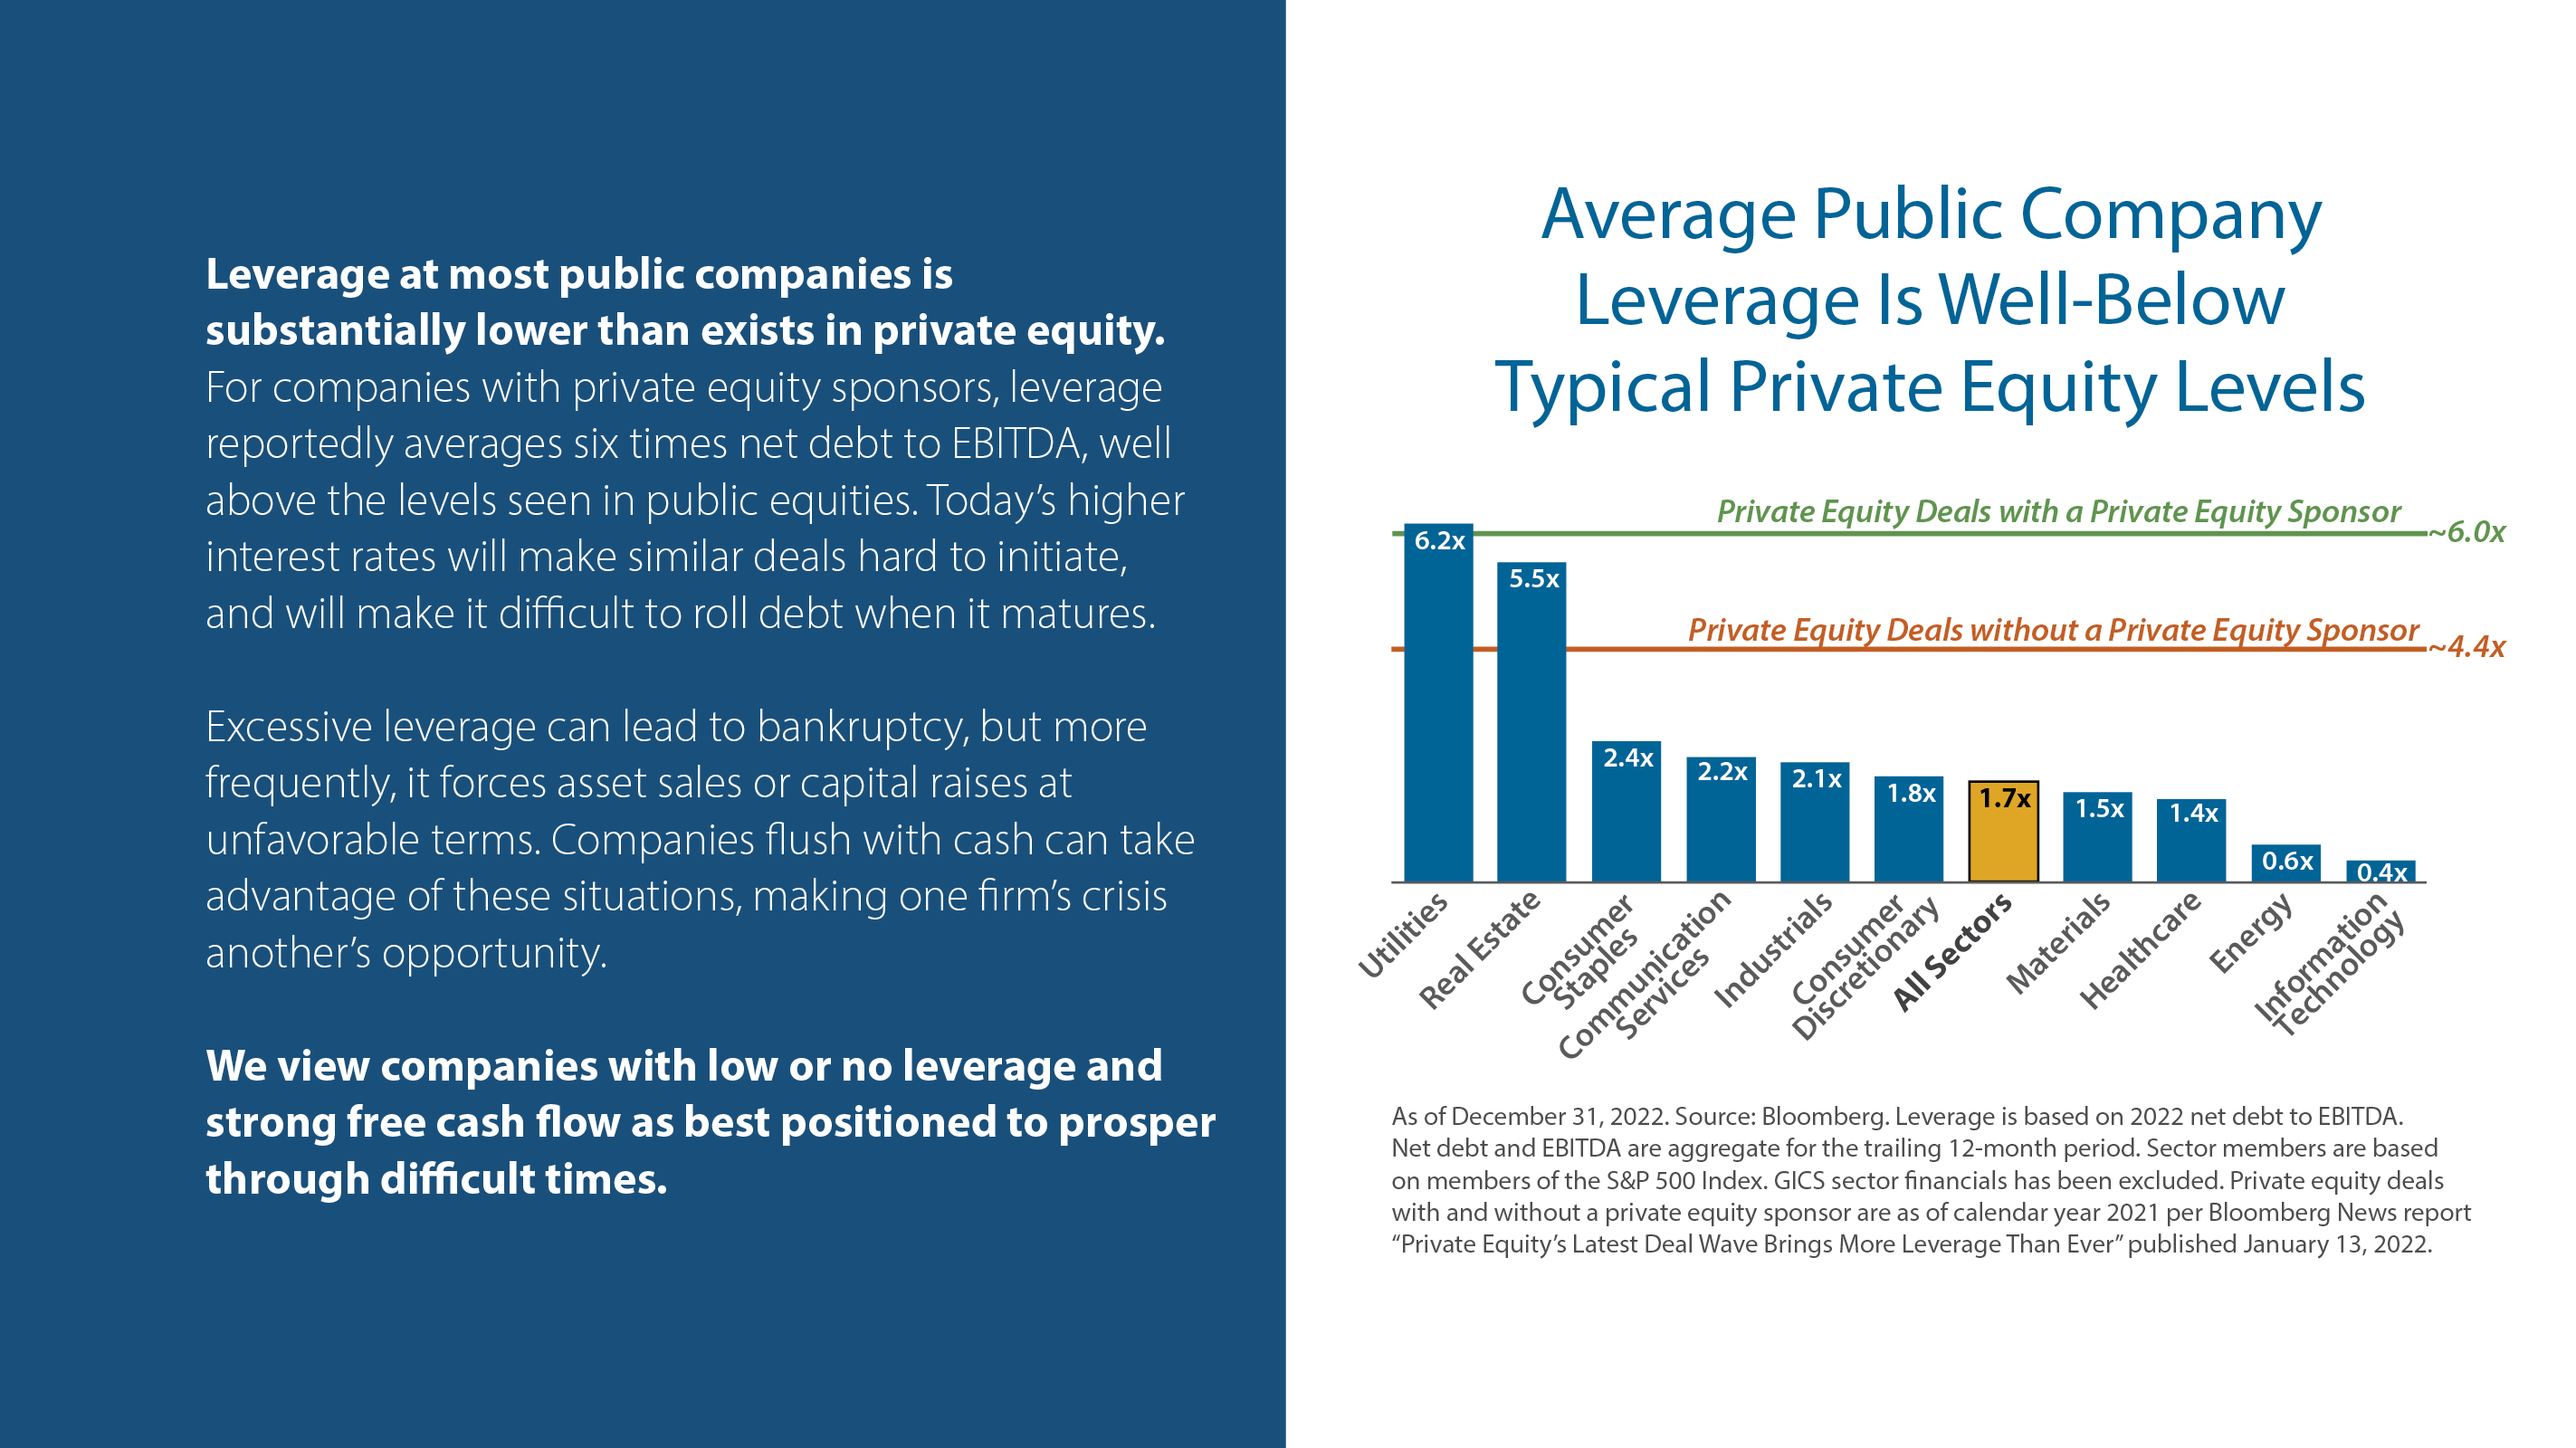 Average Public Company Leverage Is Well-Below Typical Private Equity Levels